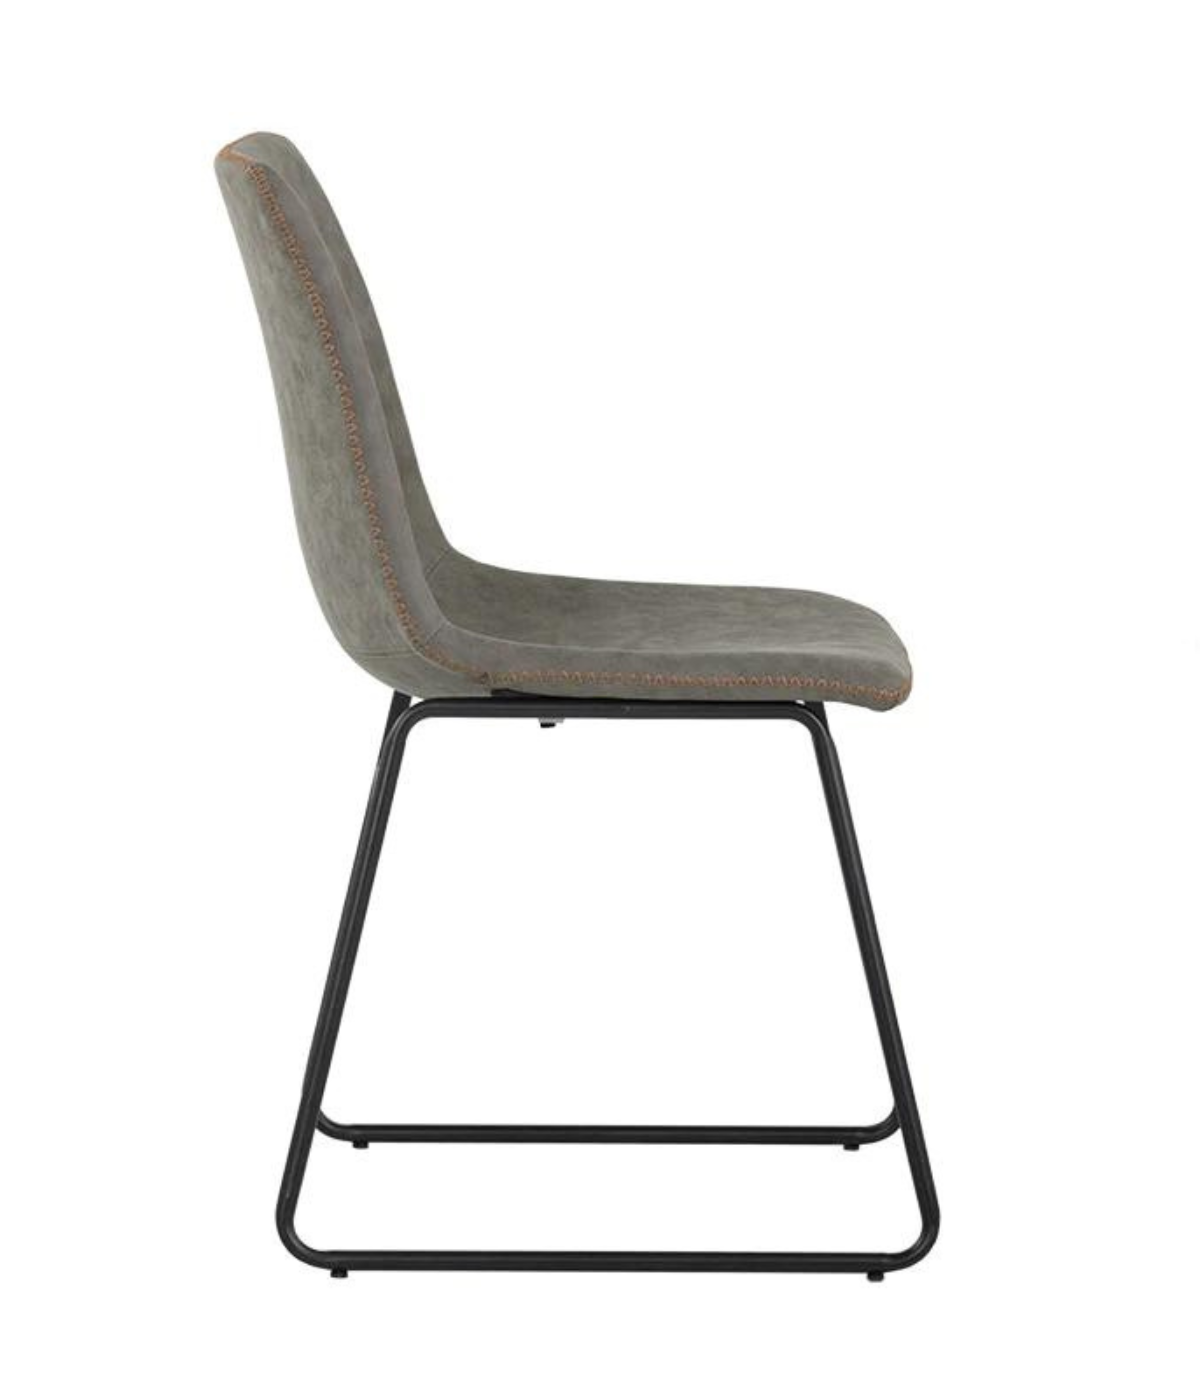 Cal Dining Chair